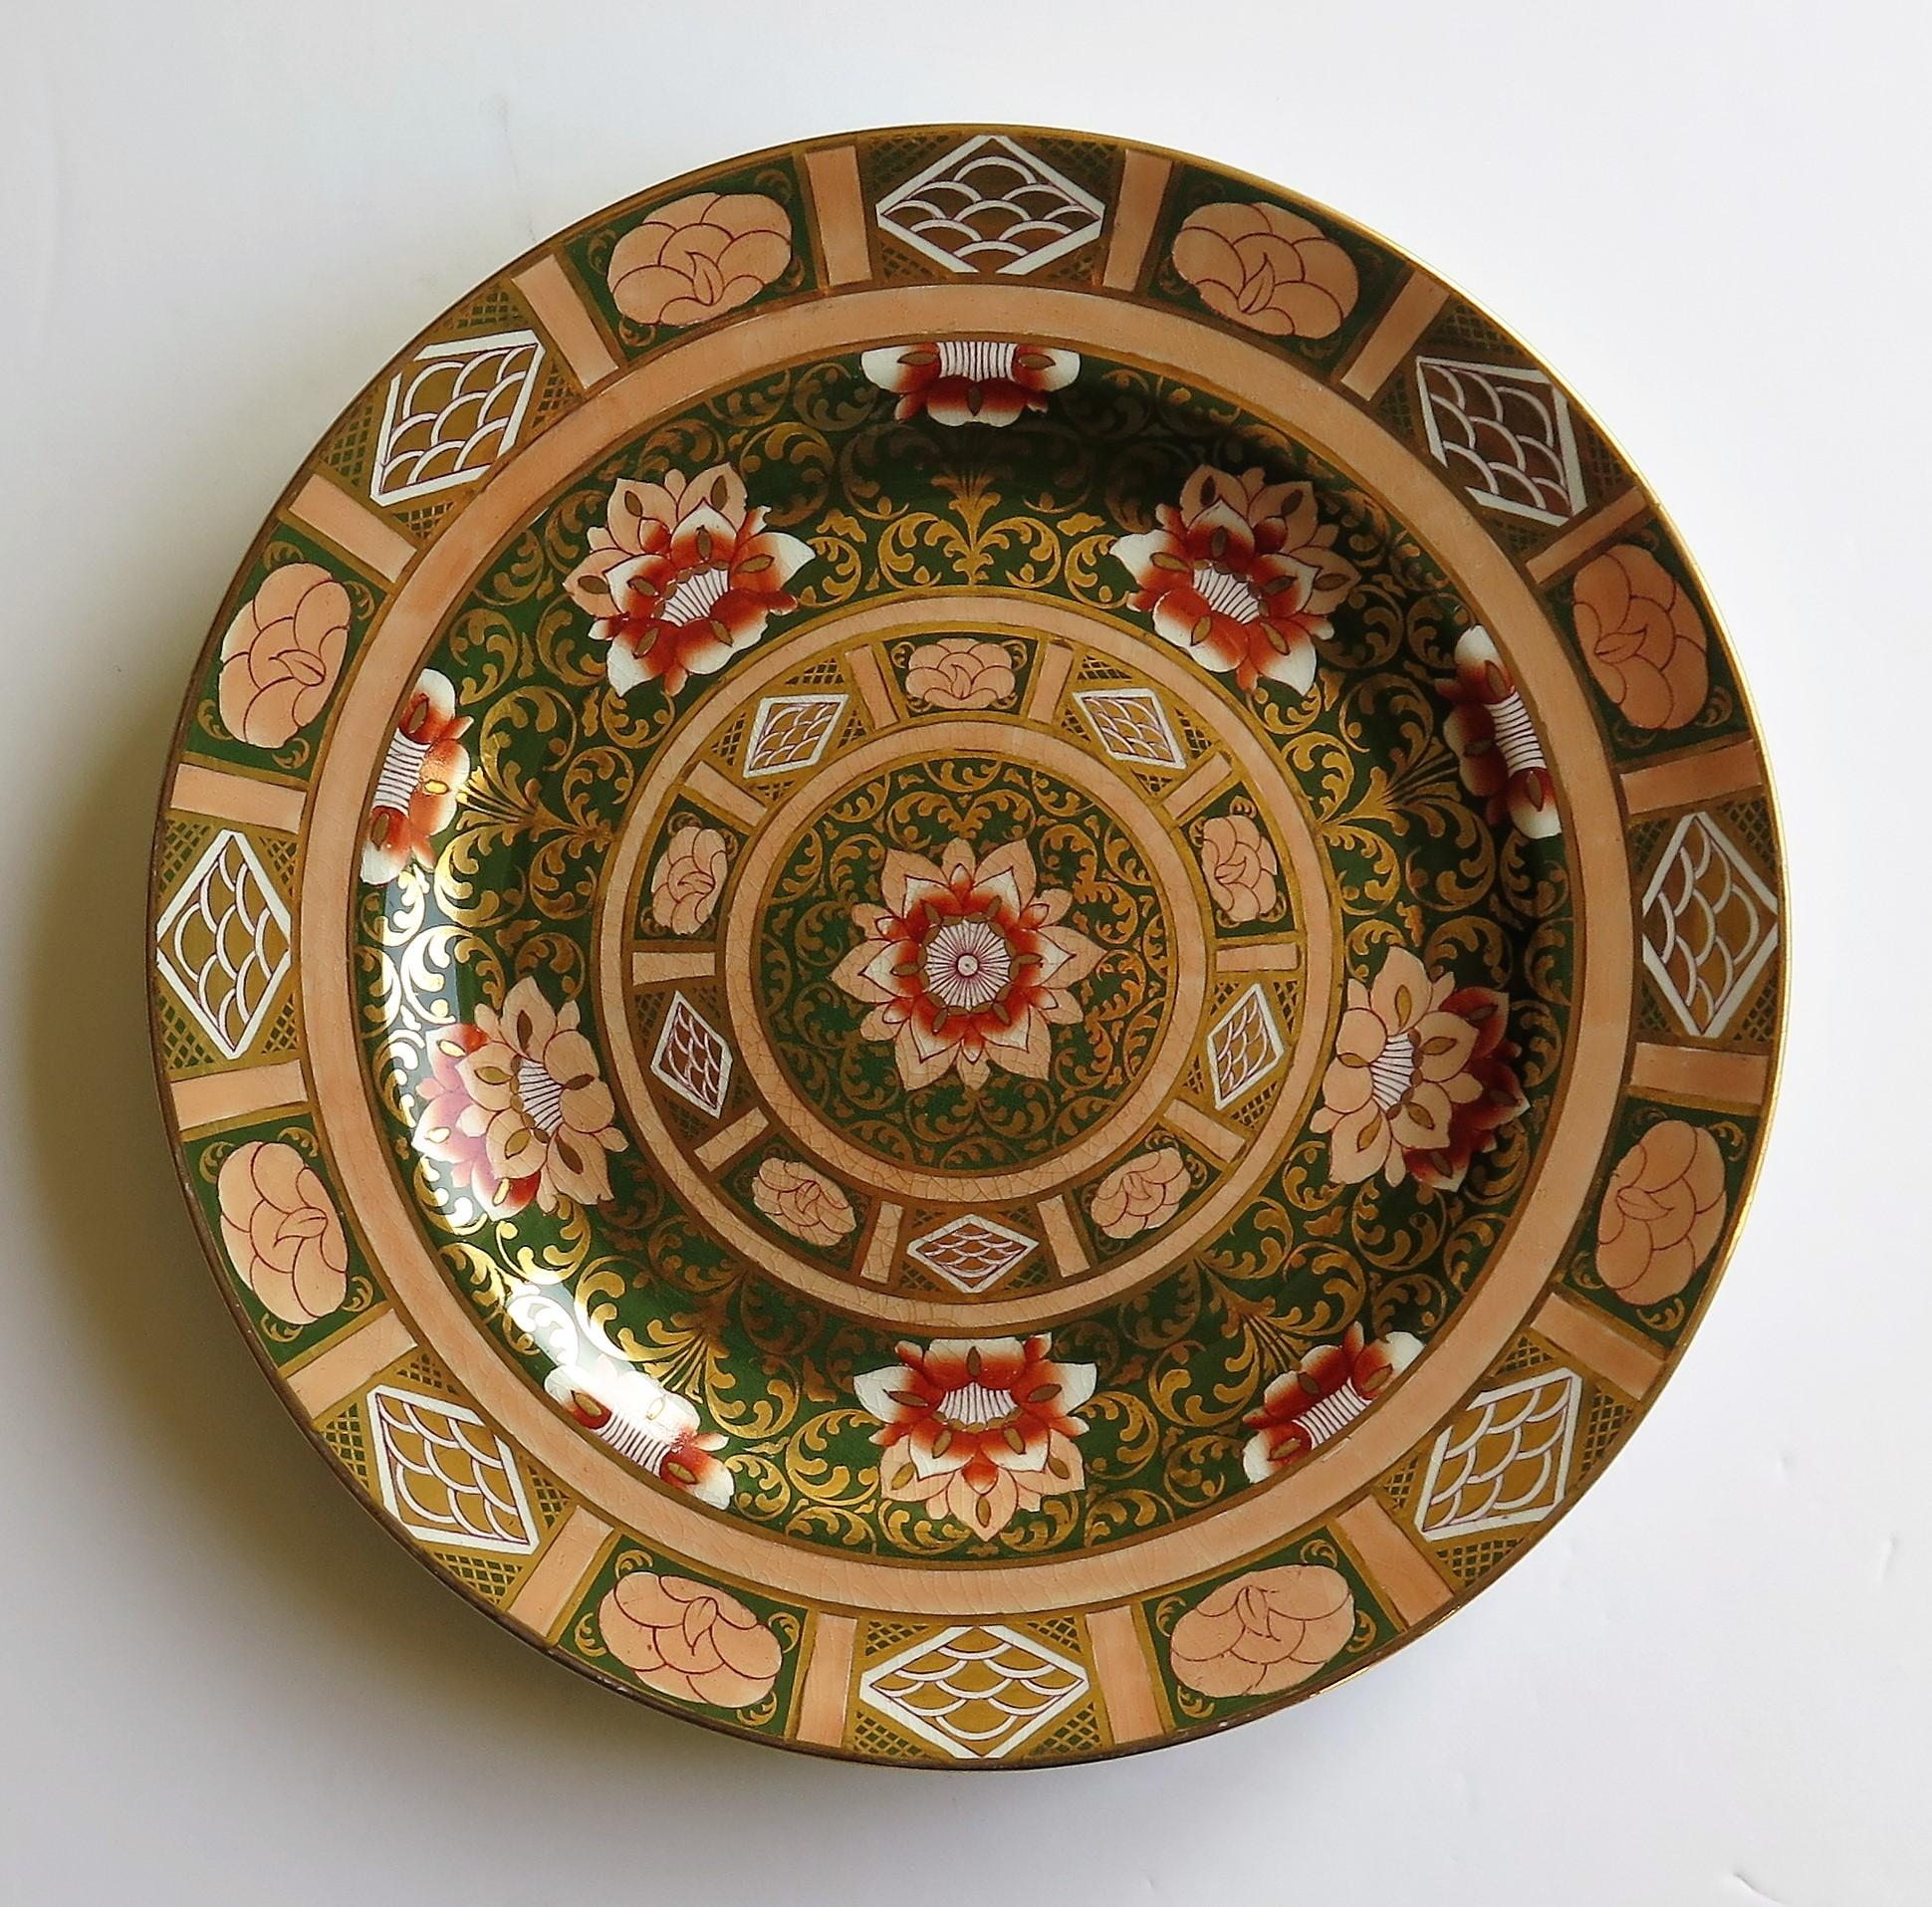 This is a late 19th century Mason’s ironstone large Dinner Plate in a striking heavily gilded pattern.

This large plate is decorated in a bold chinoiserie pattern that is very similar to the Central Flowers and Twirls pattern as documented and